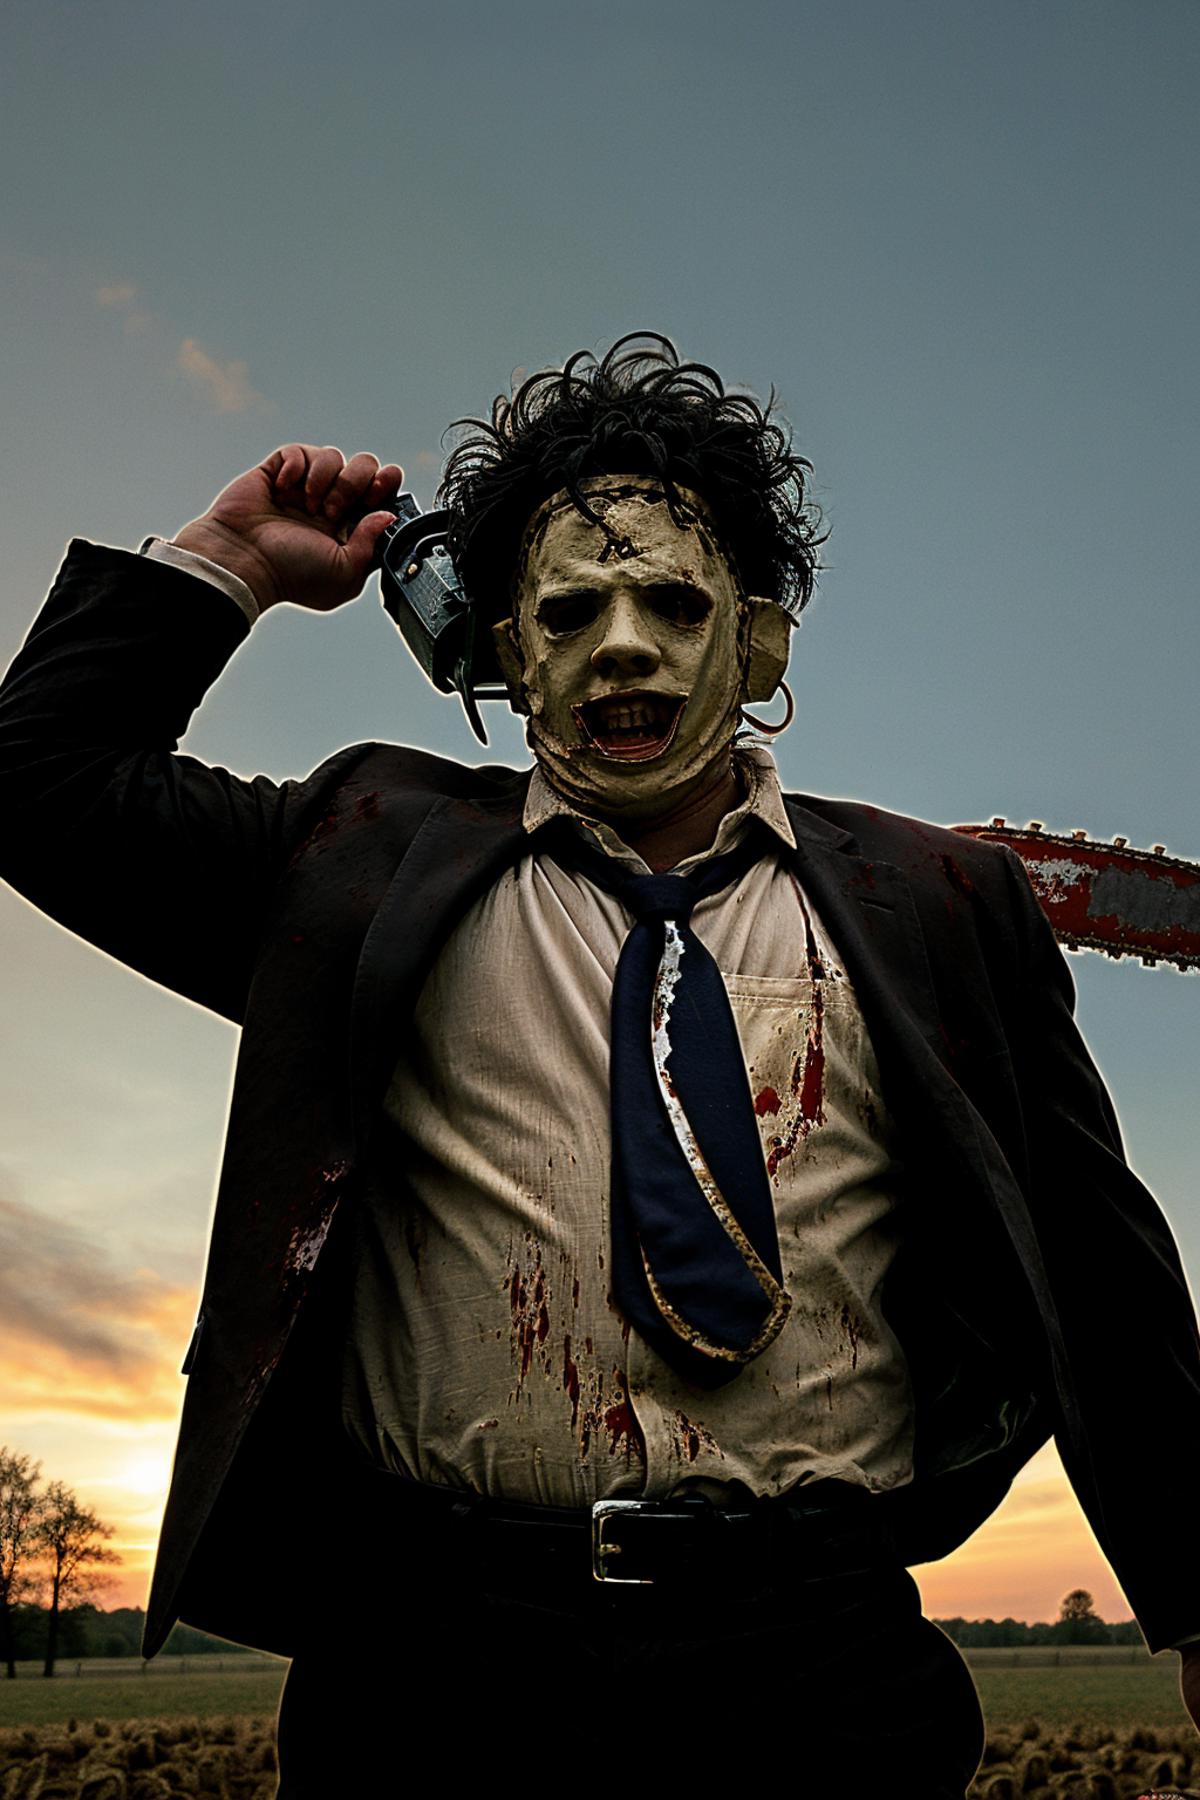 Leatherface - The Texas Chainsaw Massacre image by Rejean